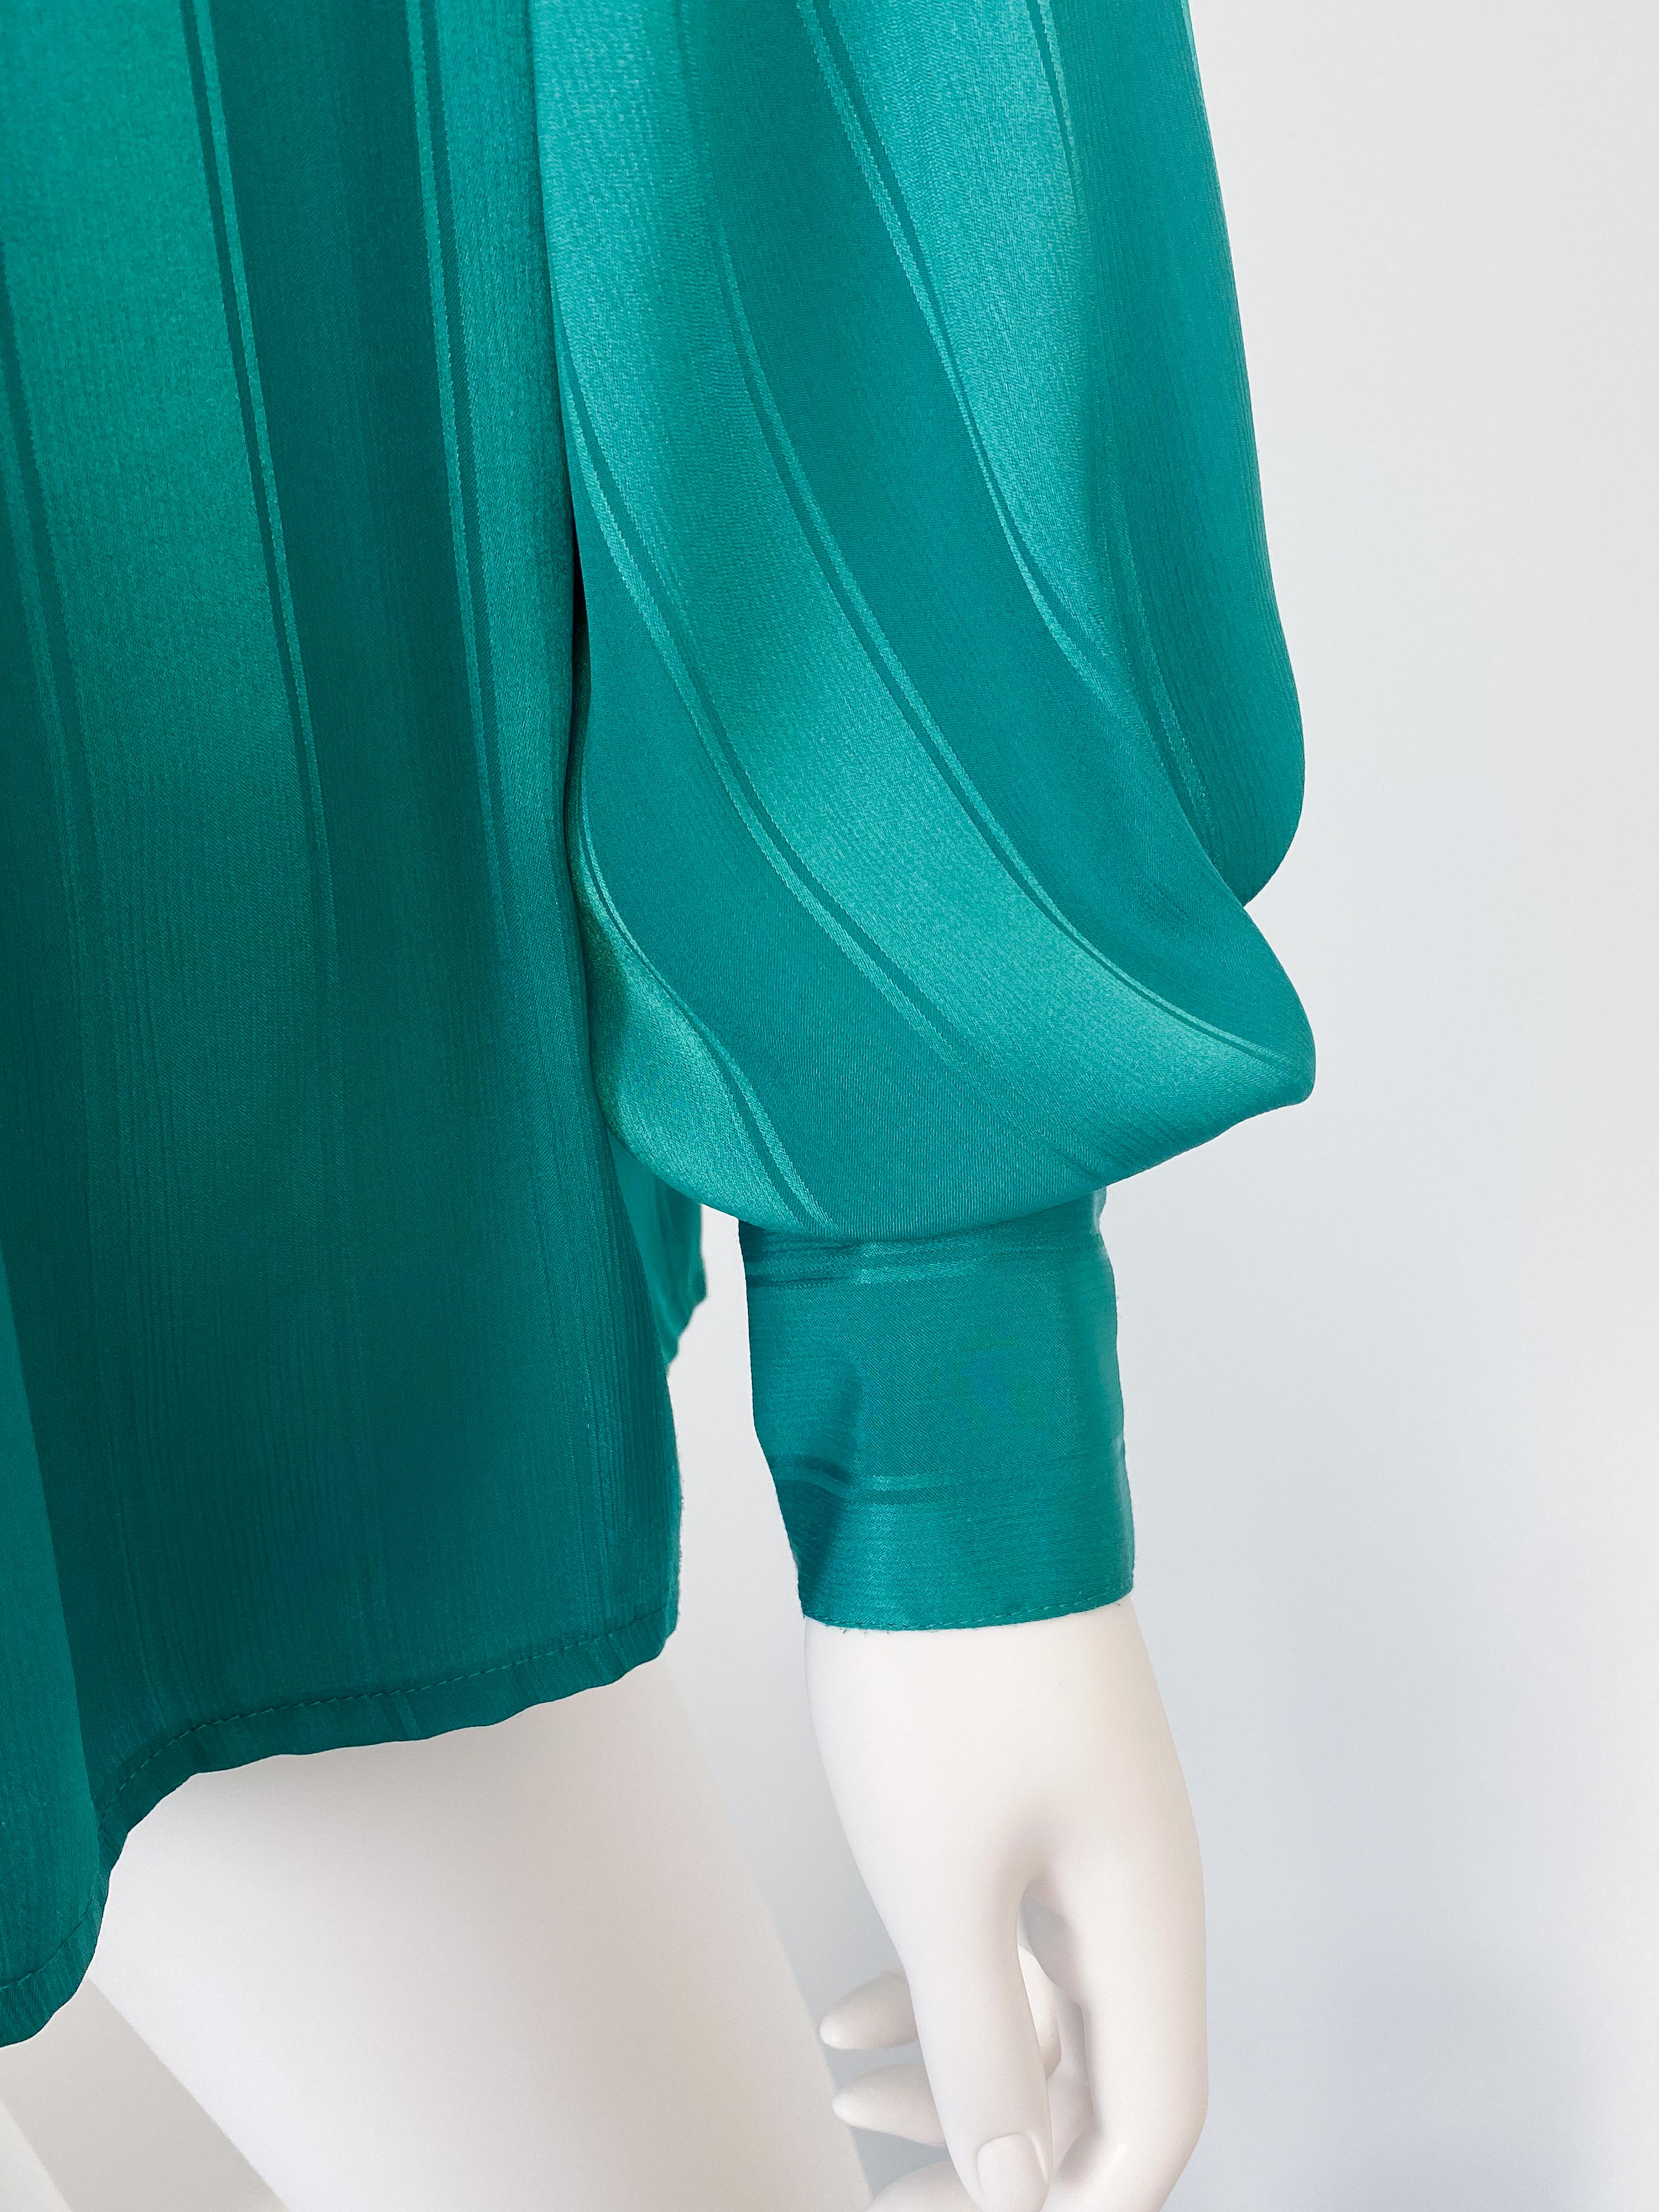 Vintage 1980s Silky Polyester Bow Blouse Top Emerald Green Stripes Size 12/14 For Sale 1